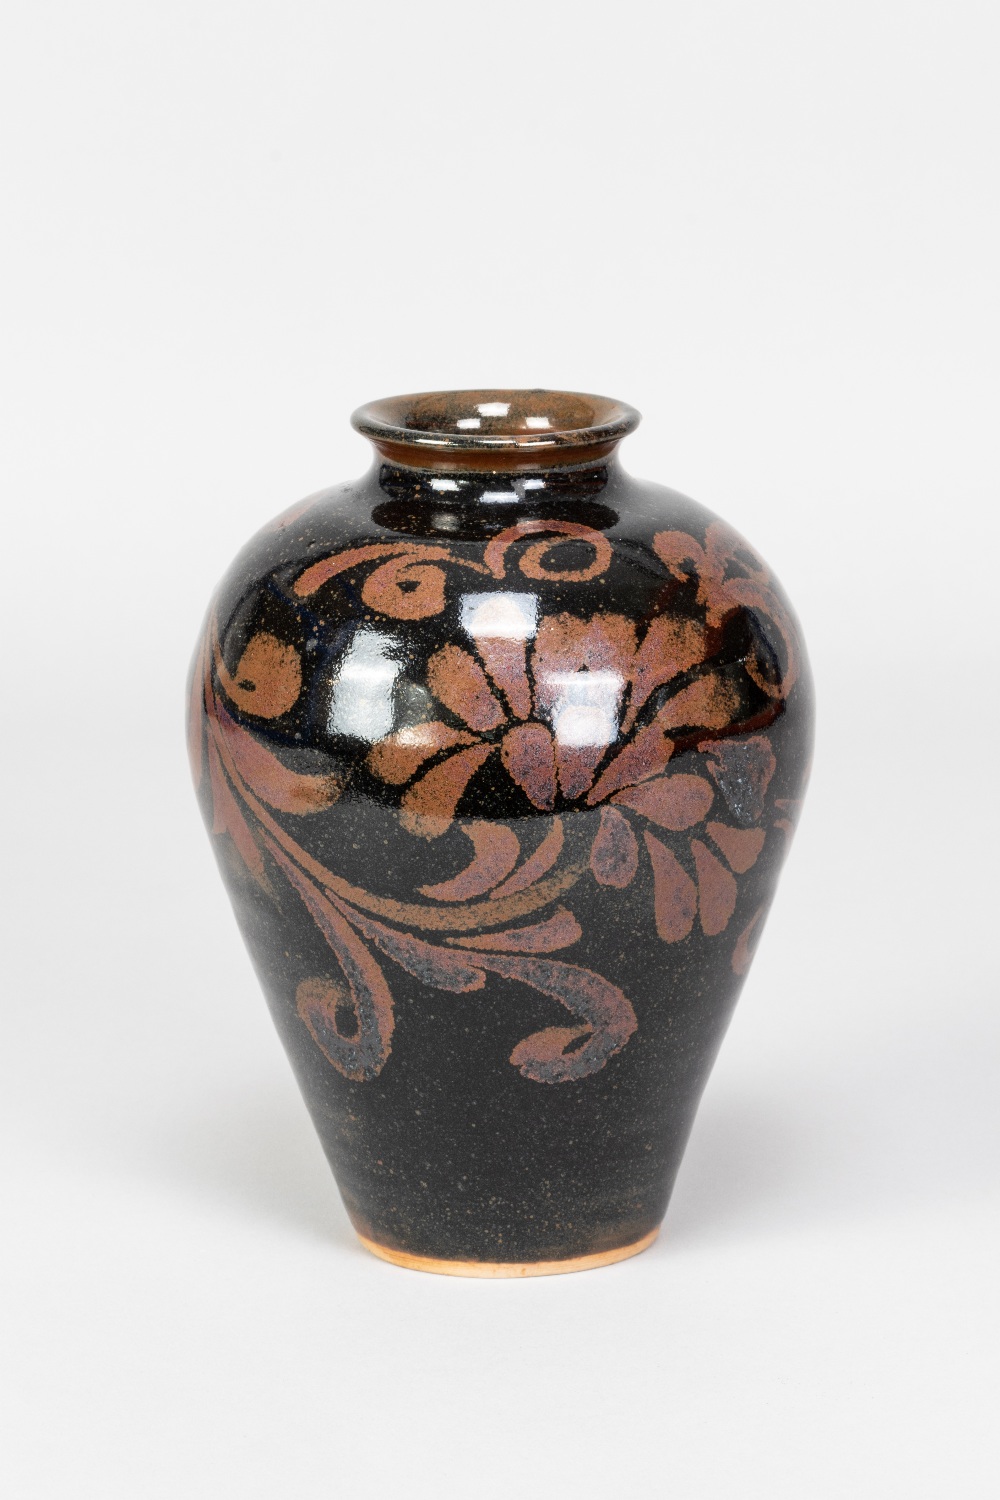 CHARLES VYSE (1882-1971); a stoneware vase with floral decoration on tenmoku ground, incised CV mark